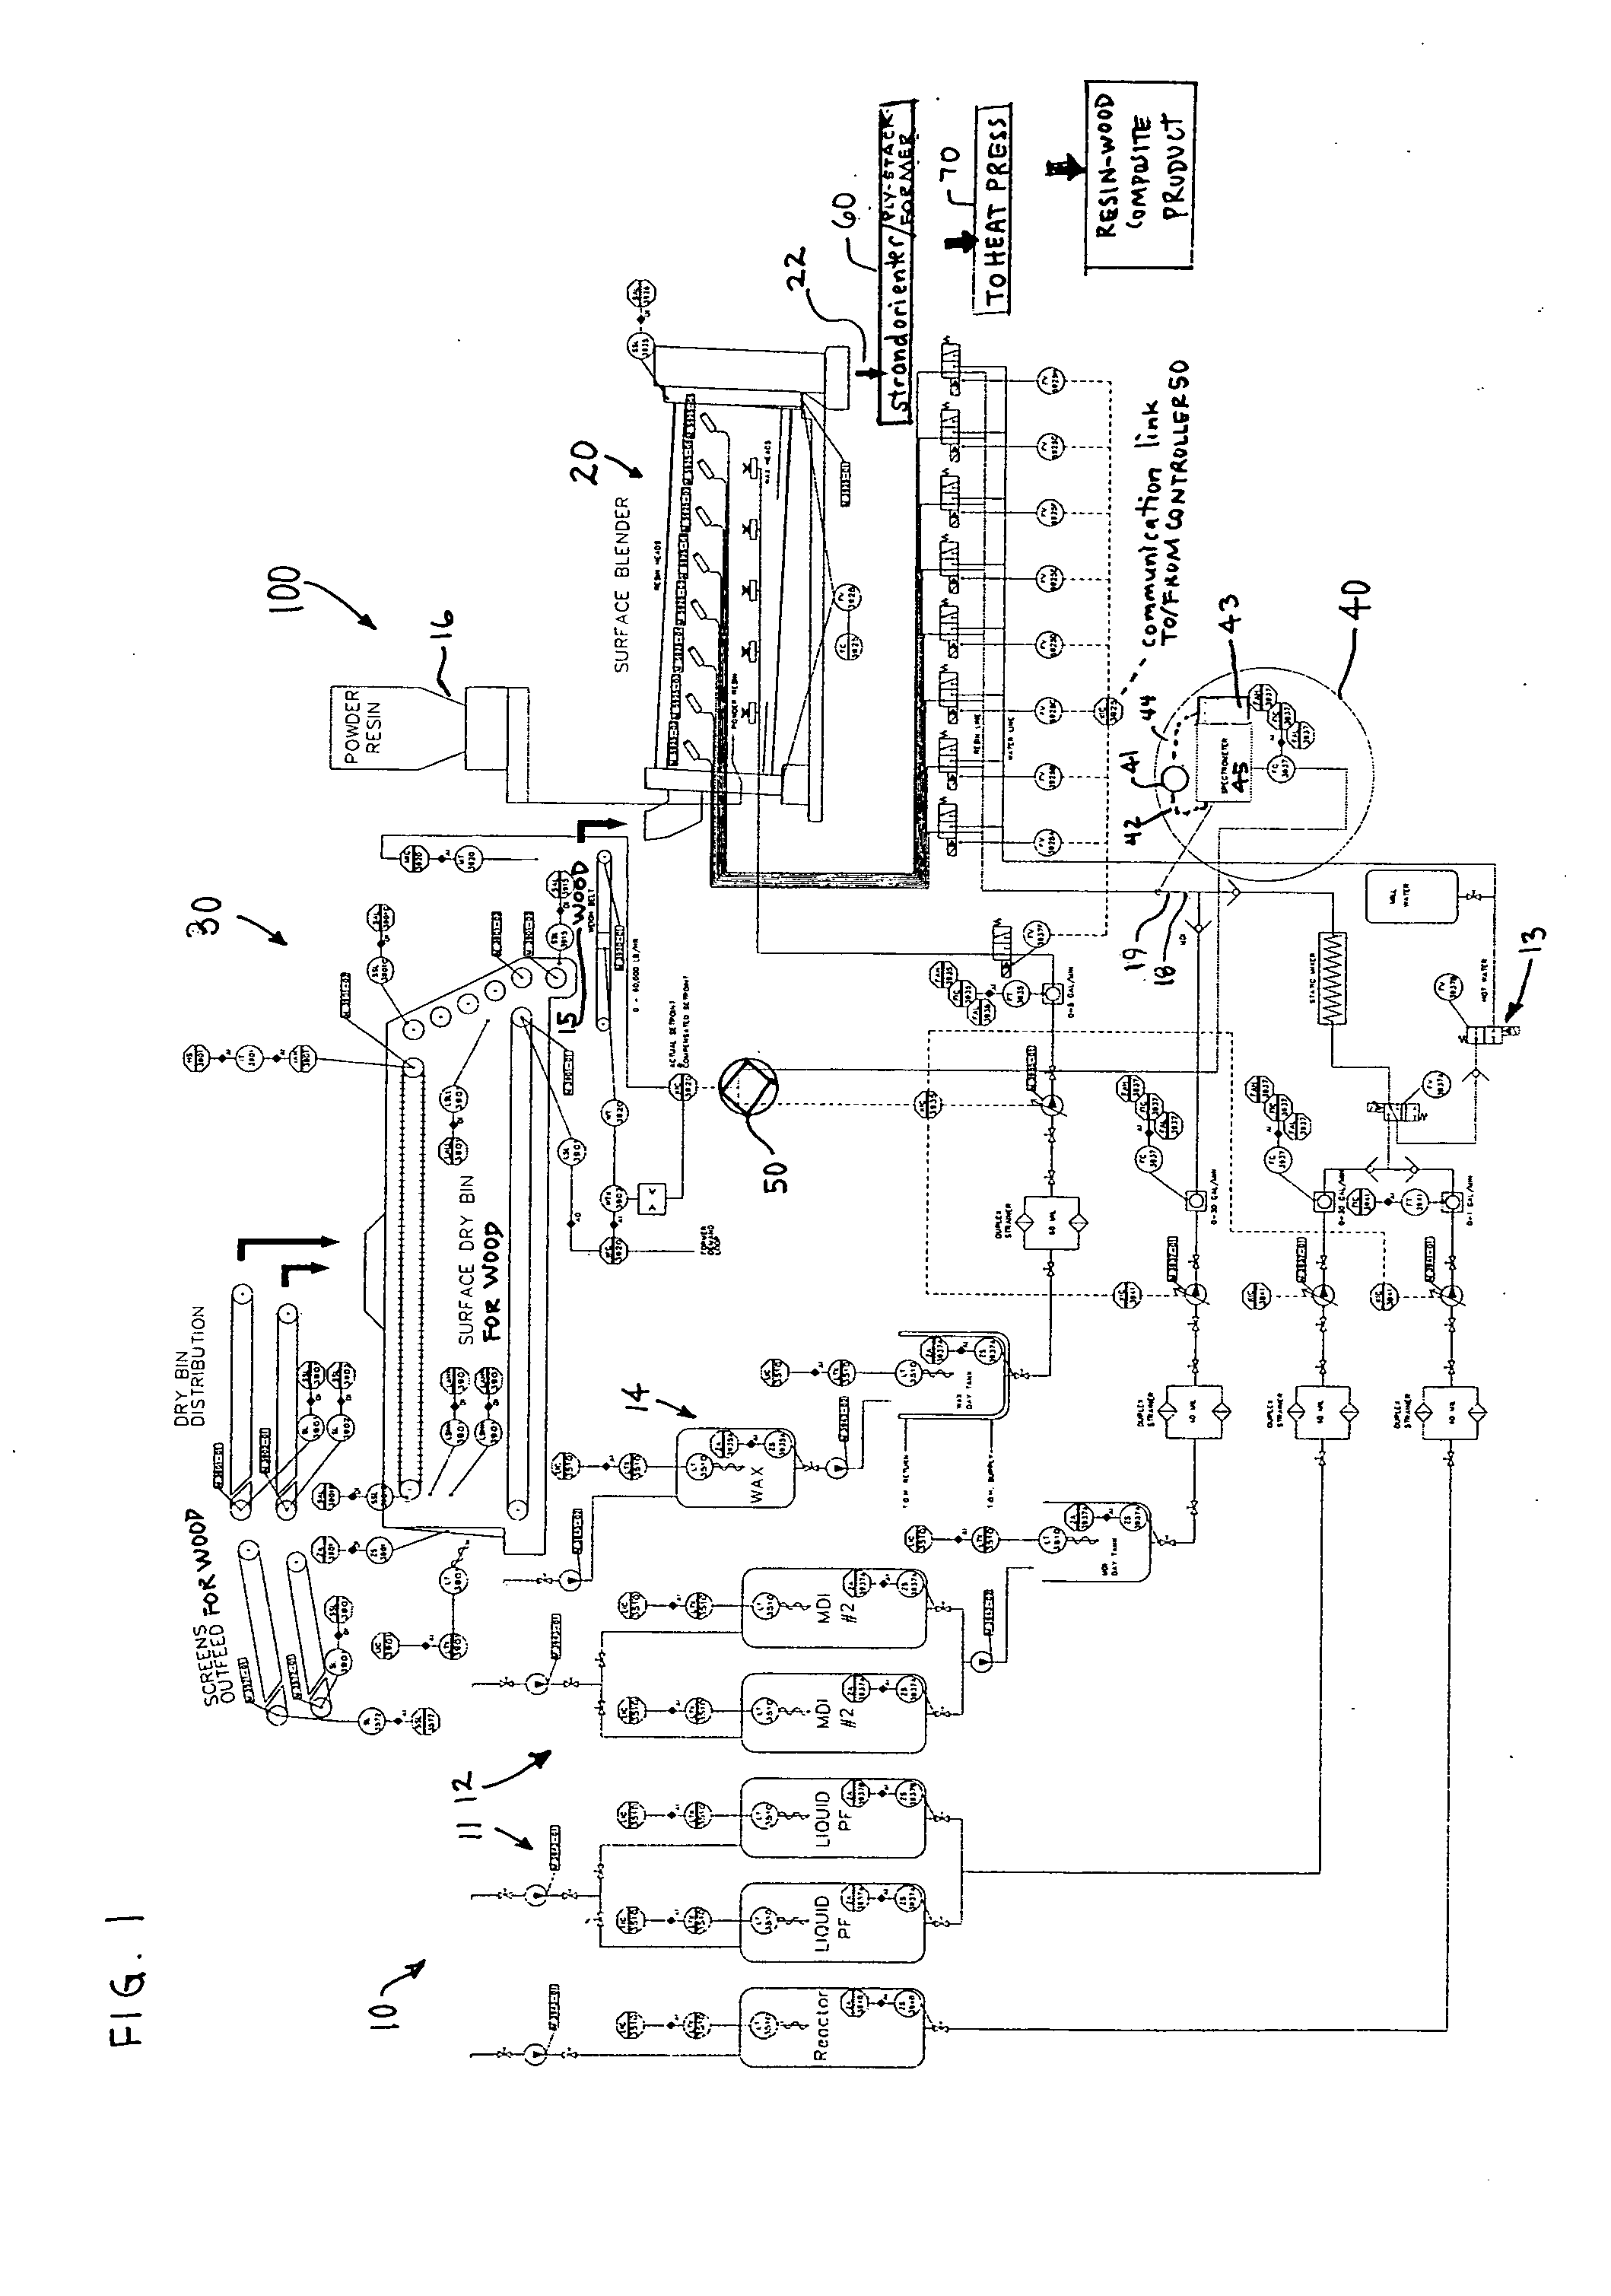 Method and system using NIR spectroscopy for in-line monitoring and controlling content in continuous production of engineered wood products